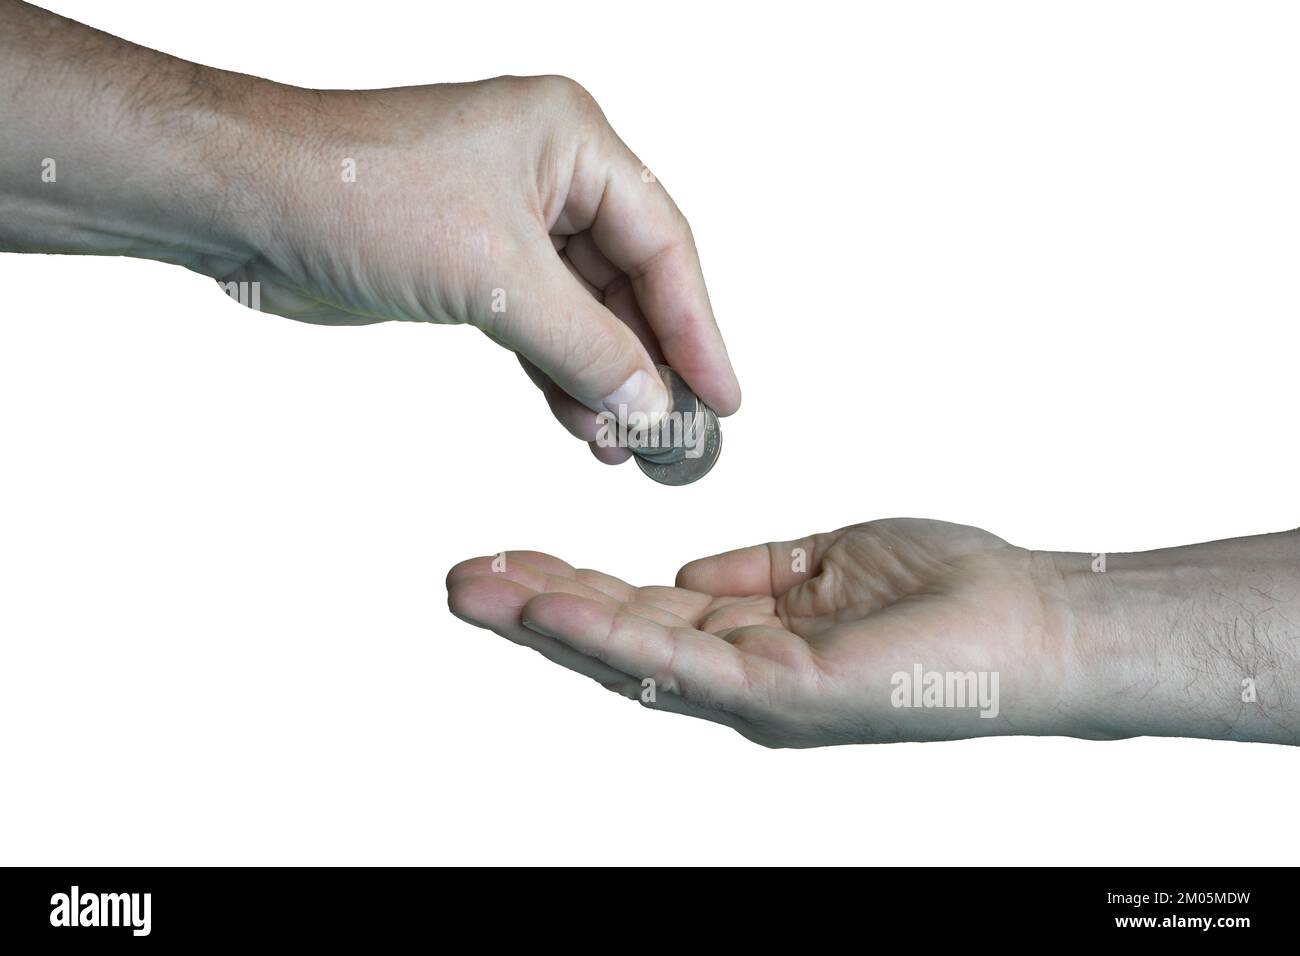 the gesture of giving some coins to a person Stock Photo